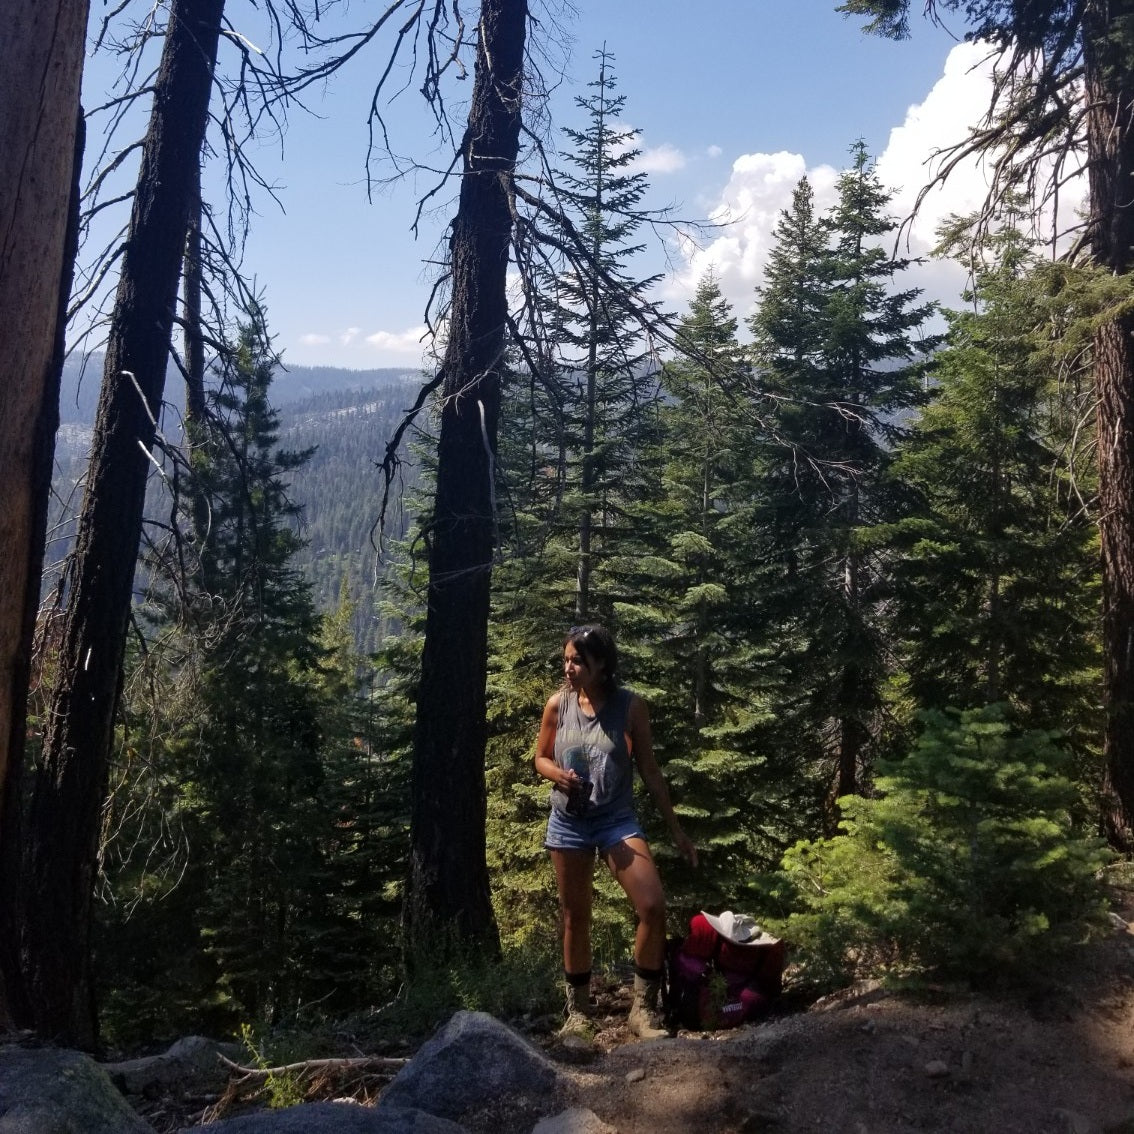  Lakes Trail, Sequoia National Park (Beginning of Trip)